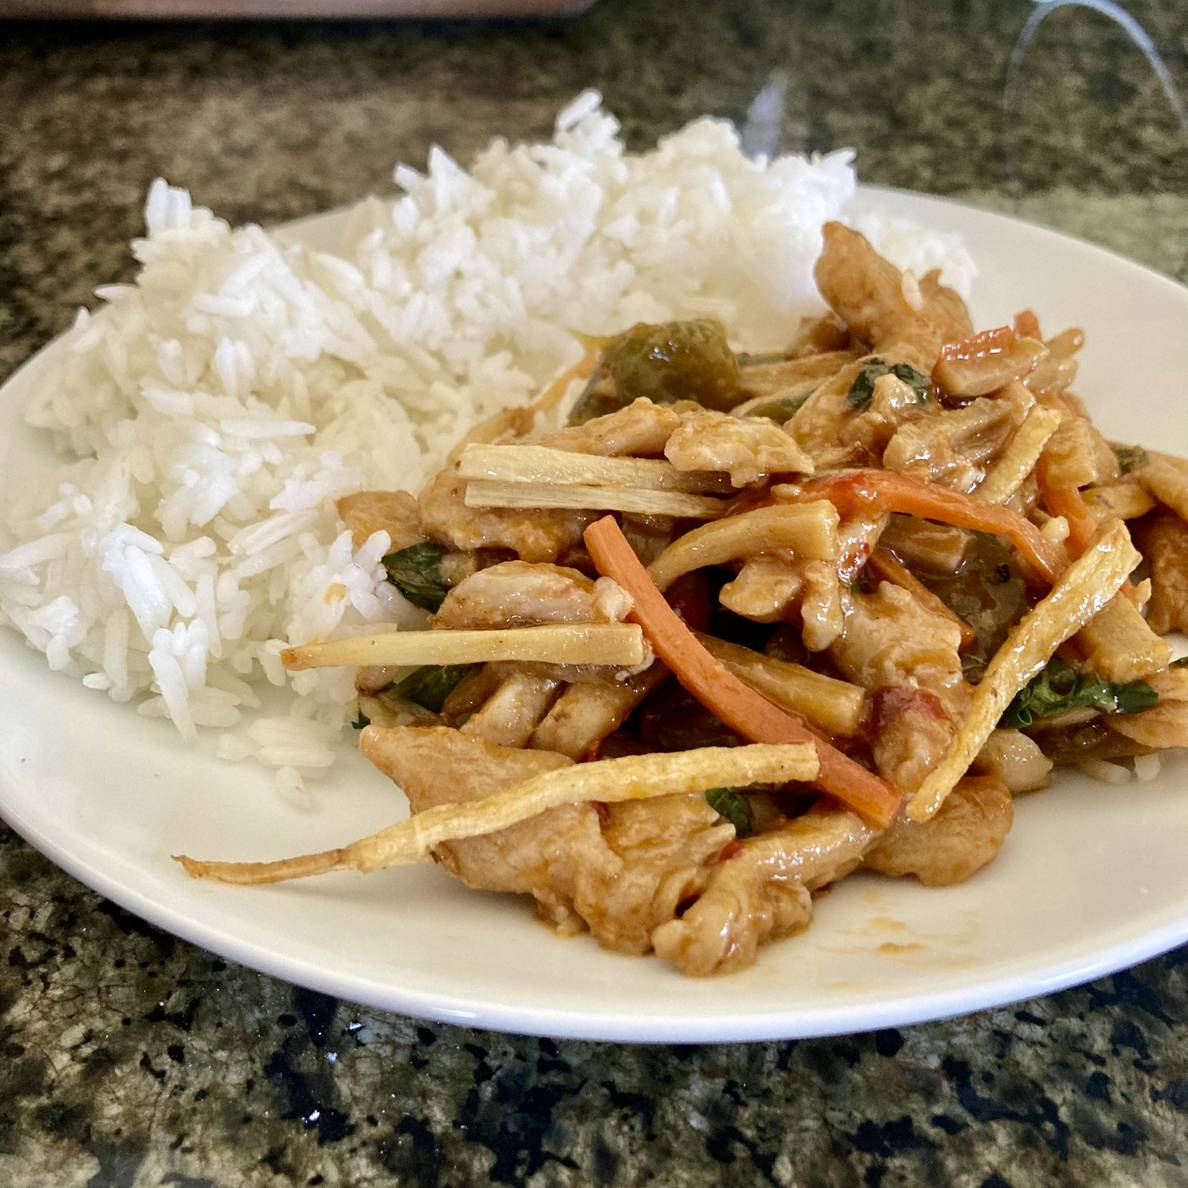 A plate on a counter is half full with rice and half full with a stir fry of chicken, carrots, chilies, and bamboo shoots.